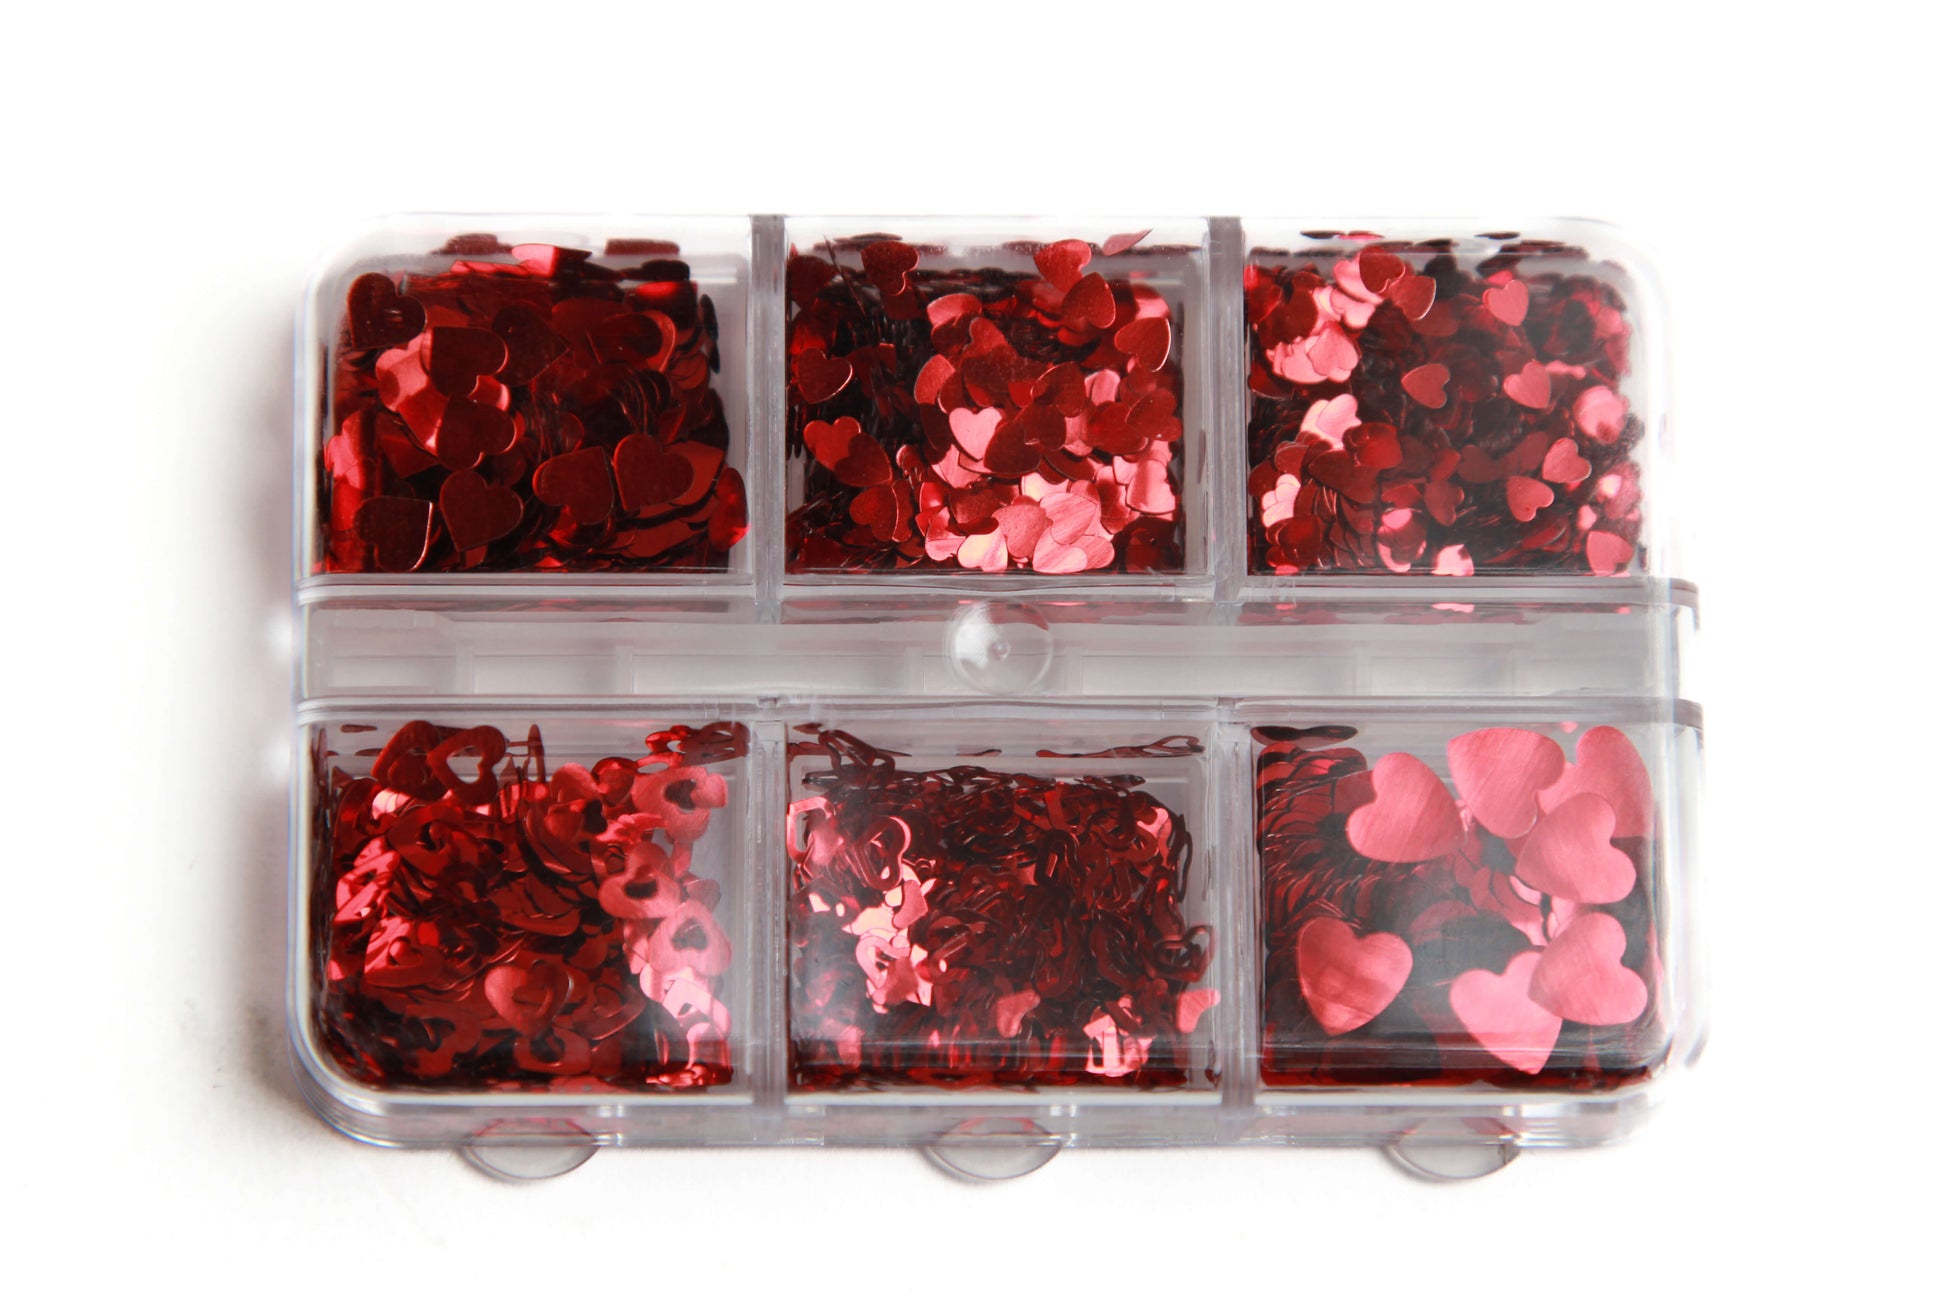 Elevate your manicure with our Blaque D' Youre heart-shaped sequin nail art decorations. Our high-quality supplies make it easy to create stunning and unique designs, perfect for any occasion. Whether you're a professional nail artist or looking to add some flair to your at-home manicure, our heart-shaped sequins are versatile and can be used to create a subtle accent nail or a full-blown heart-inspired design. Shop now and let your heart shine with our nail art supplies!